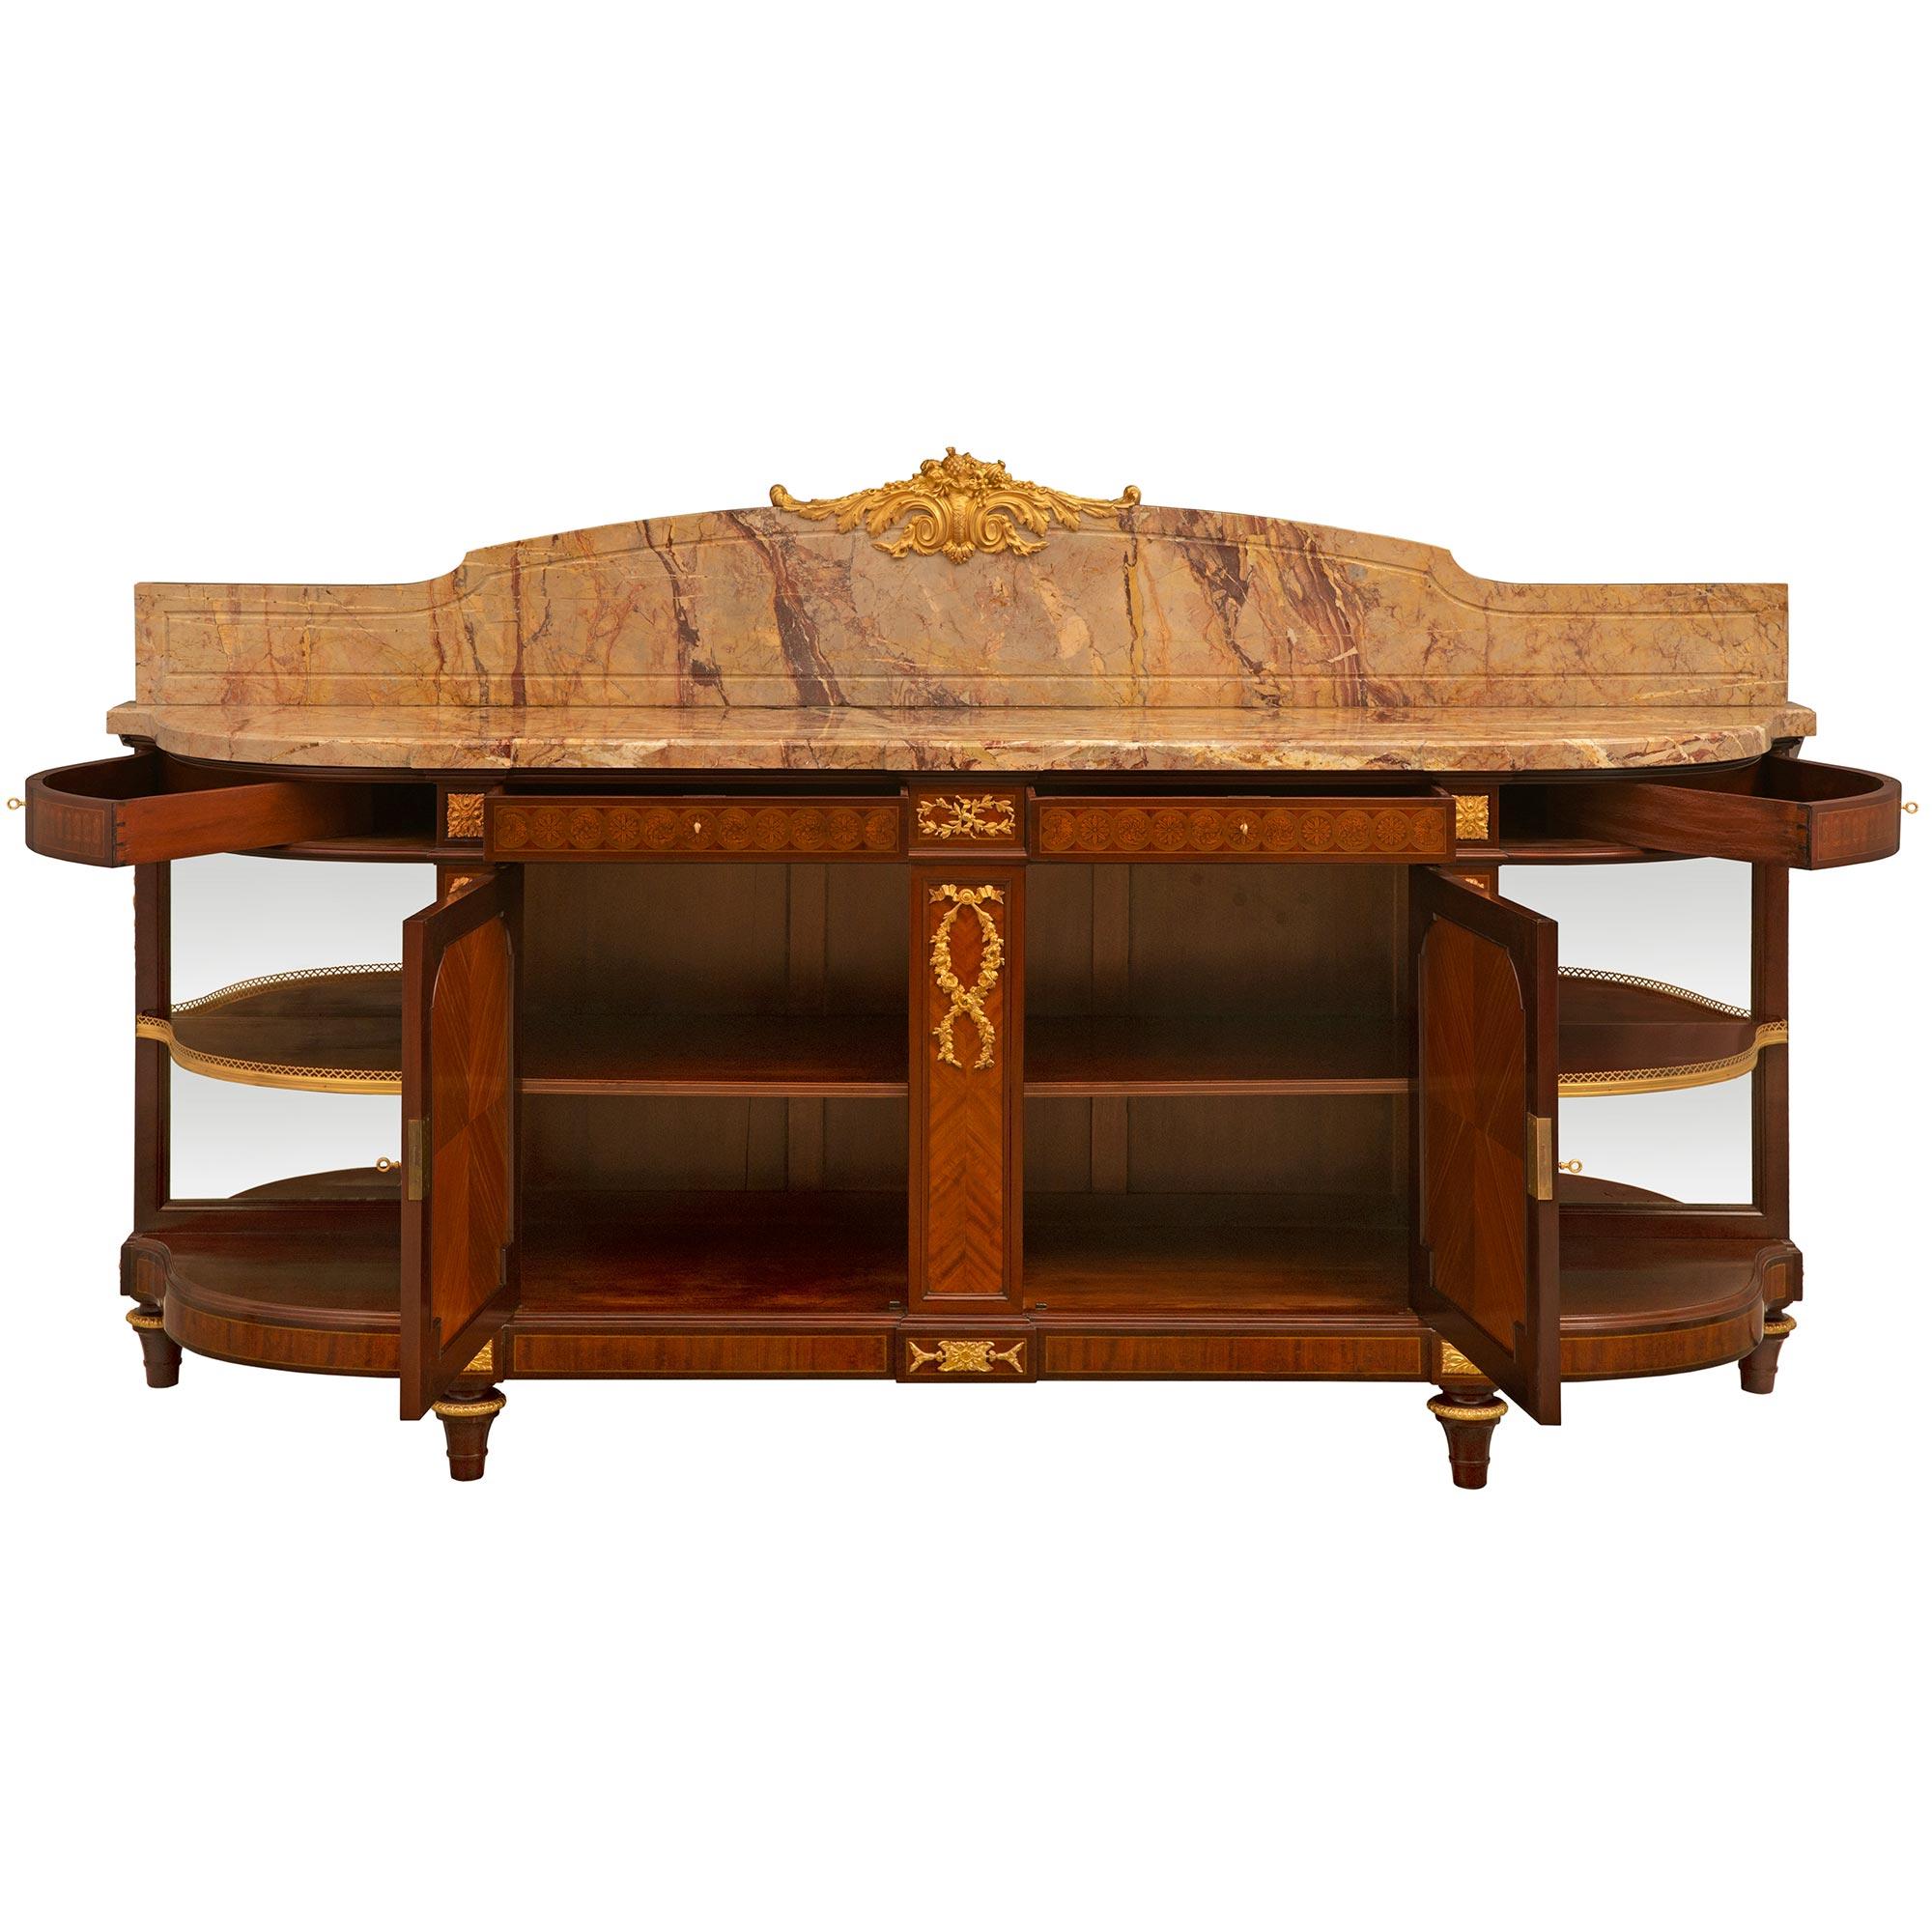 An impressive and most elegant French 19th century Louis XVI st. Mahogany, Tulipwood, Kingwood, Ormolu and marble buffet, signed Maison Forest. The buffet is raised on solid Mahogany topie shaped feet with an Ormolu top band with an egg and dart